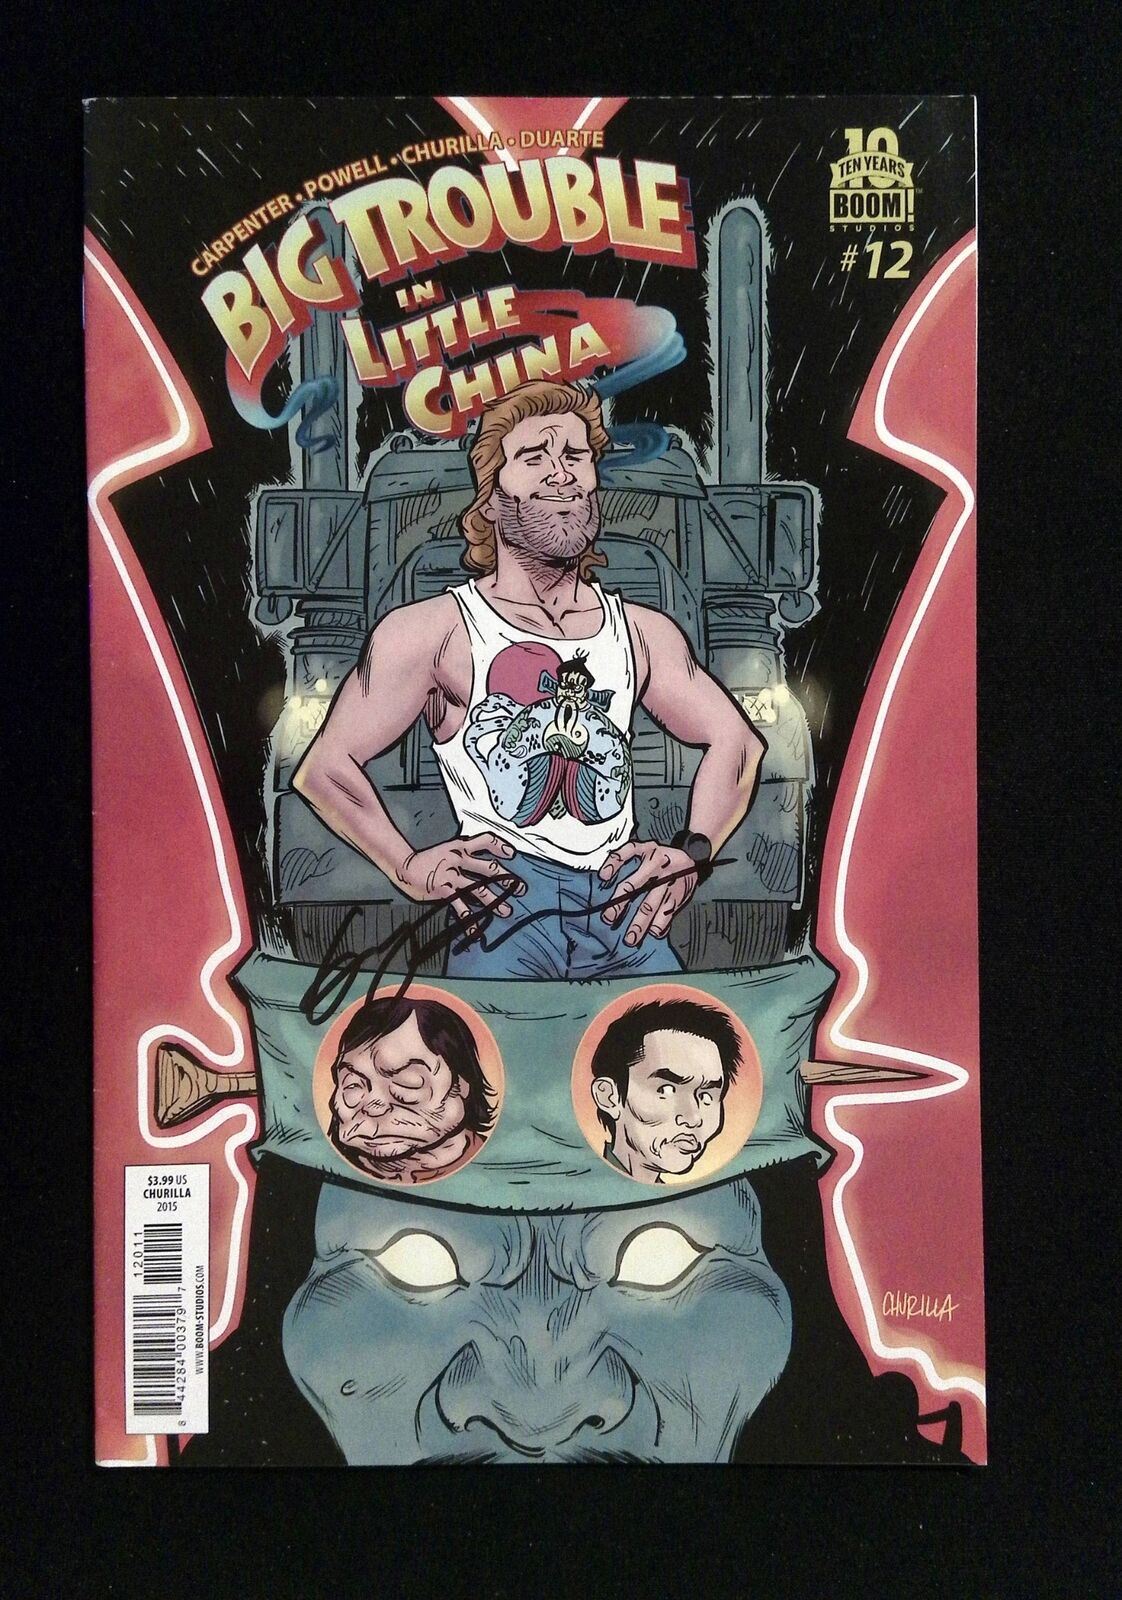 Big Trouble In Little China #12  Boom Comics 2015 Vf+  Signed By Eric Powell